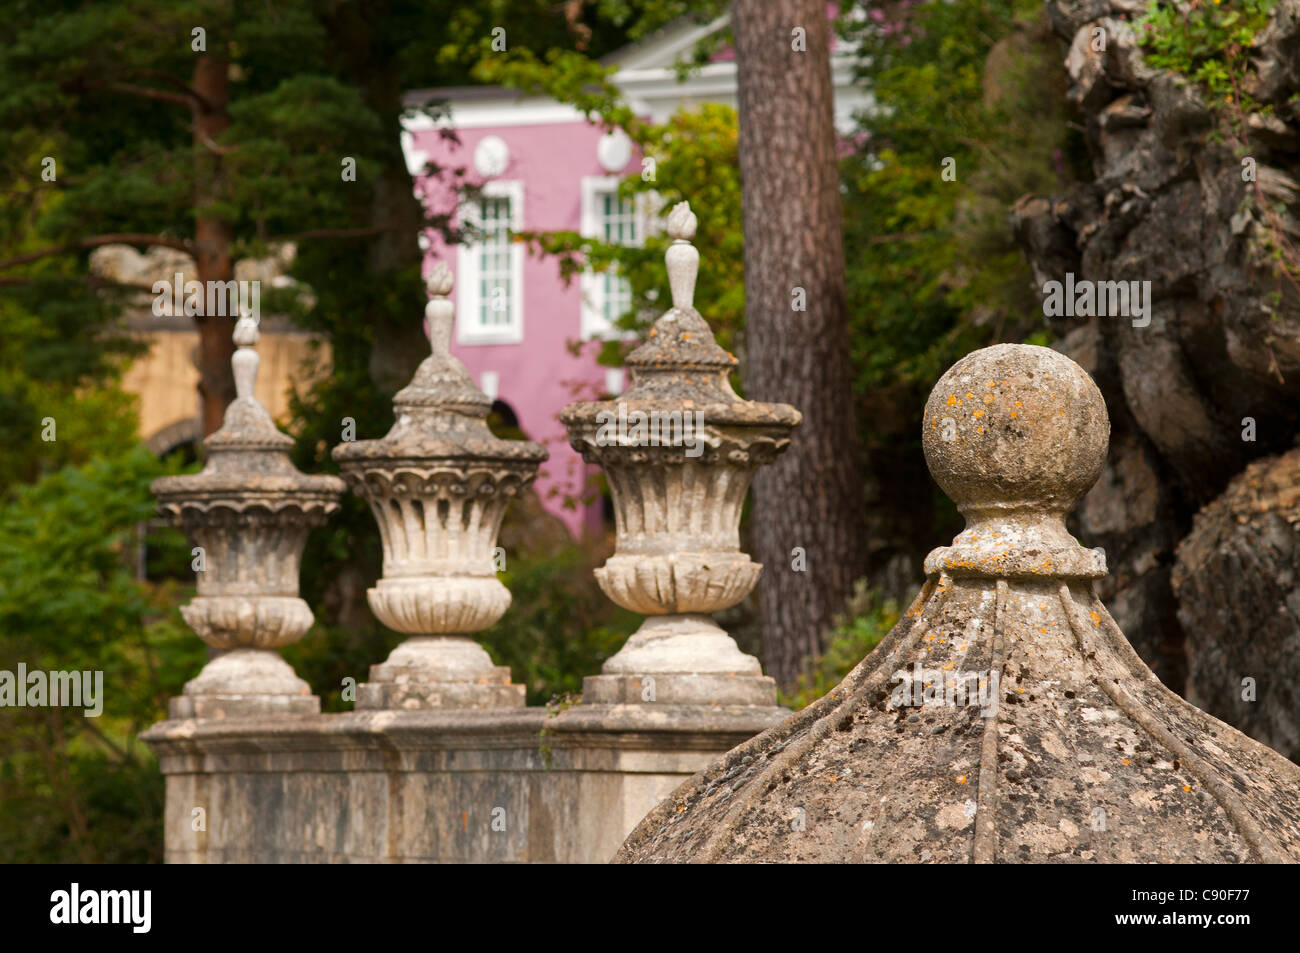 The village of Portmeirion, founded by Welsh architekt Sir Clough Williams-Ellis in 1926, Wales, UK Stock Photo